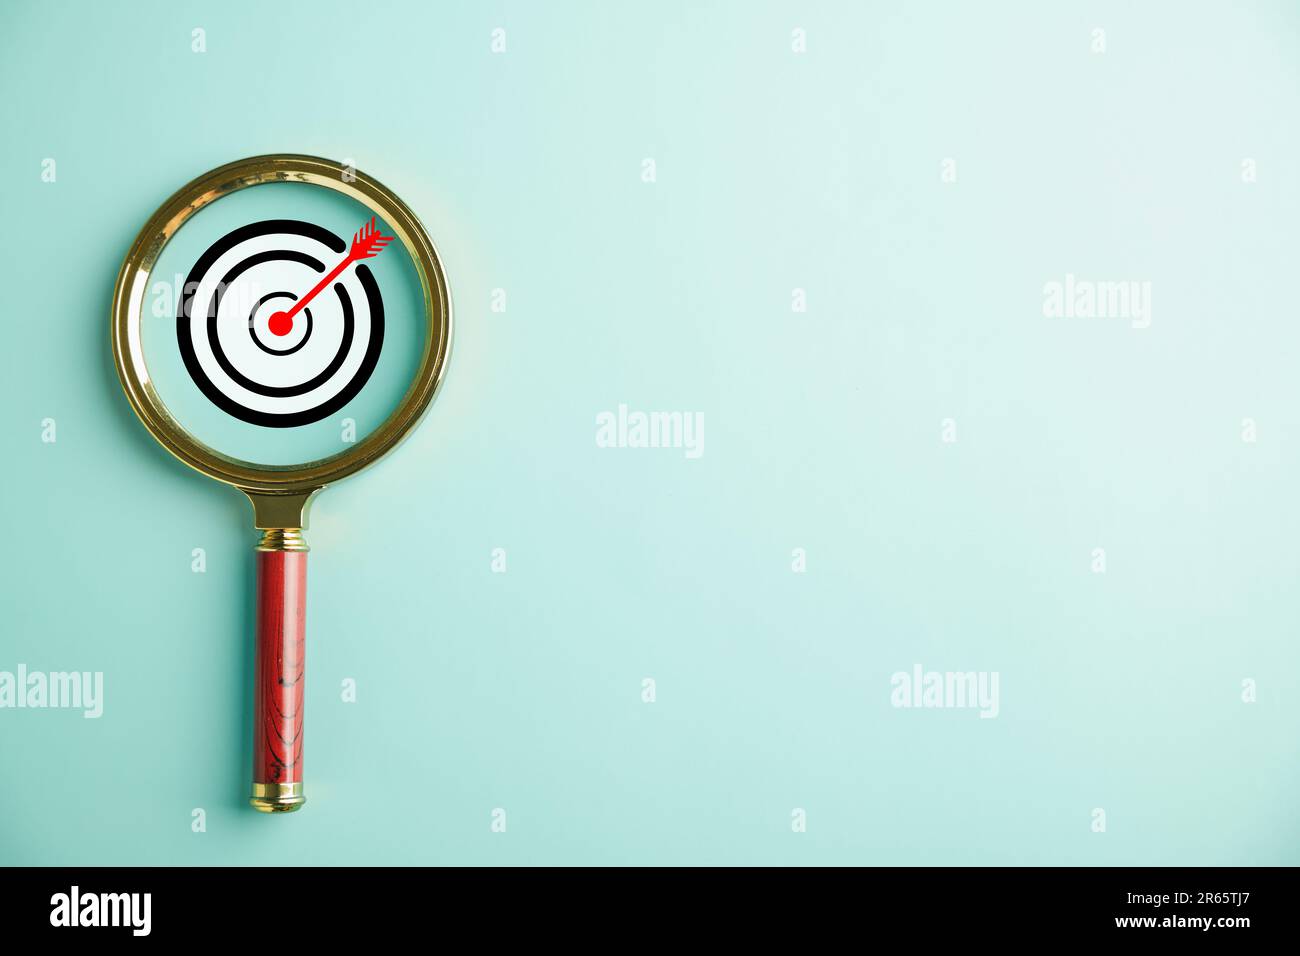 Target Board Inside Of Magnifier Glass For Focus Business